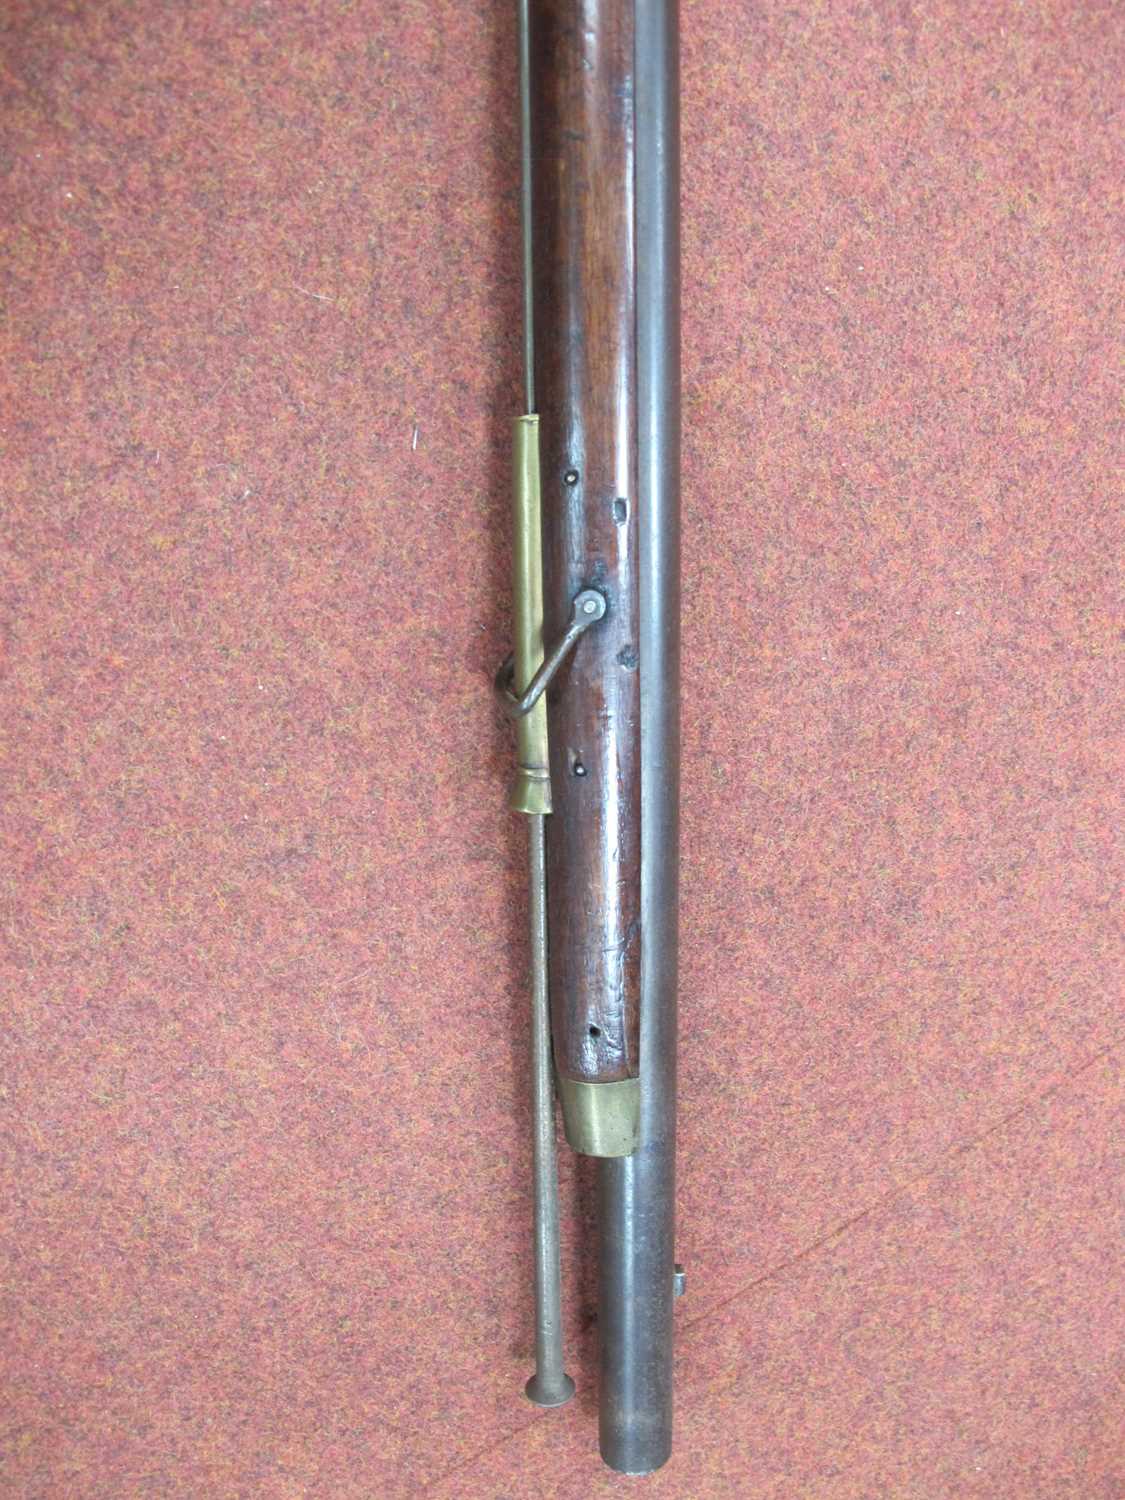 British India Pattern Circa 1810 'Brown Bess' Flintlock Musket, marked 'Tower' with 'GR' crown - Image 5 of 17